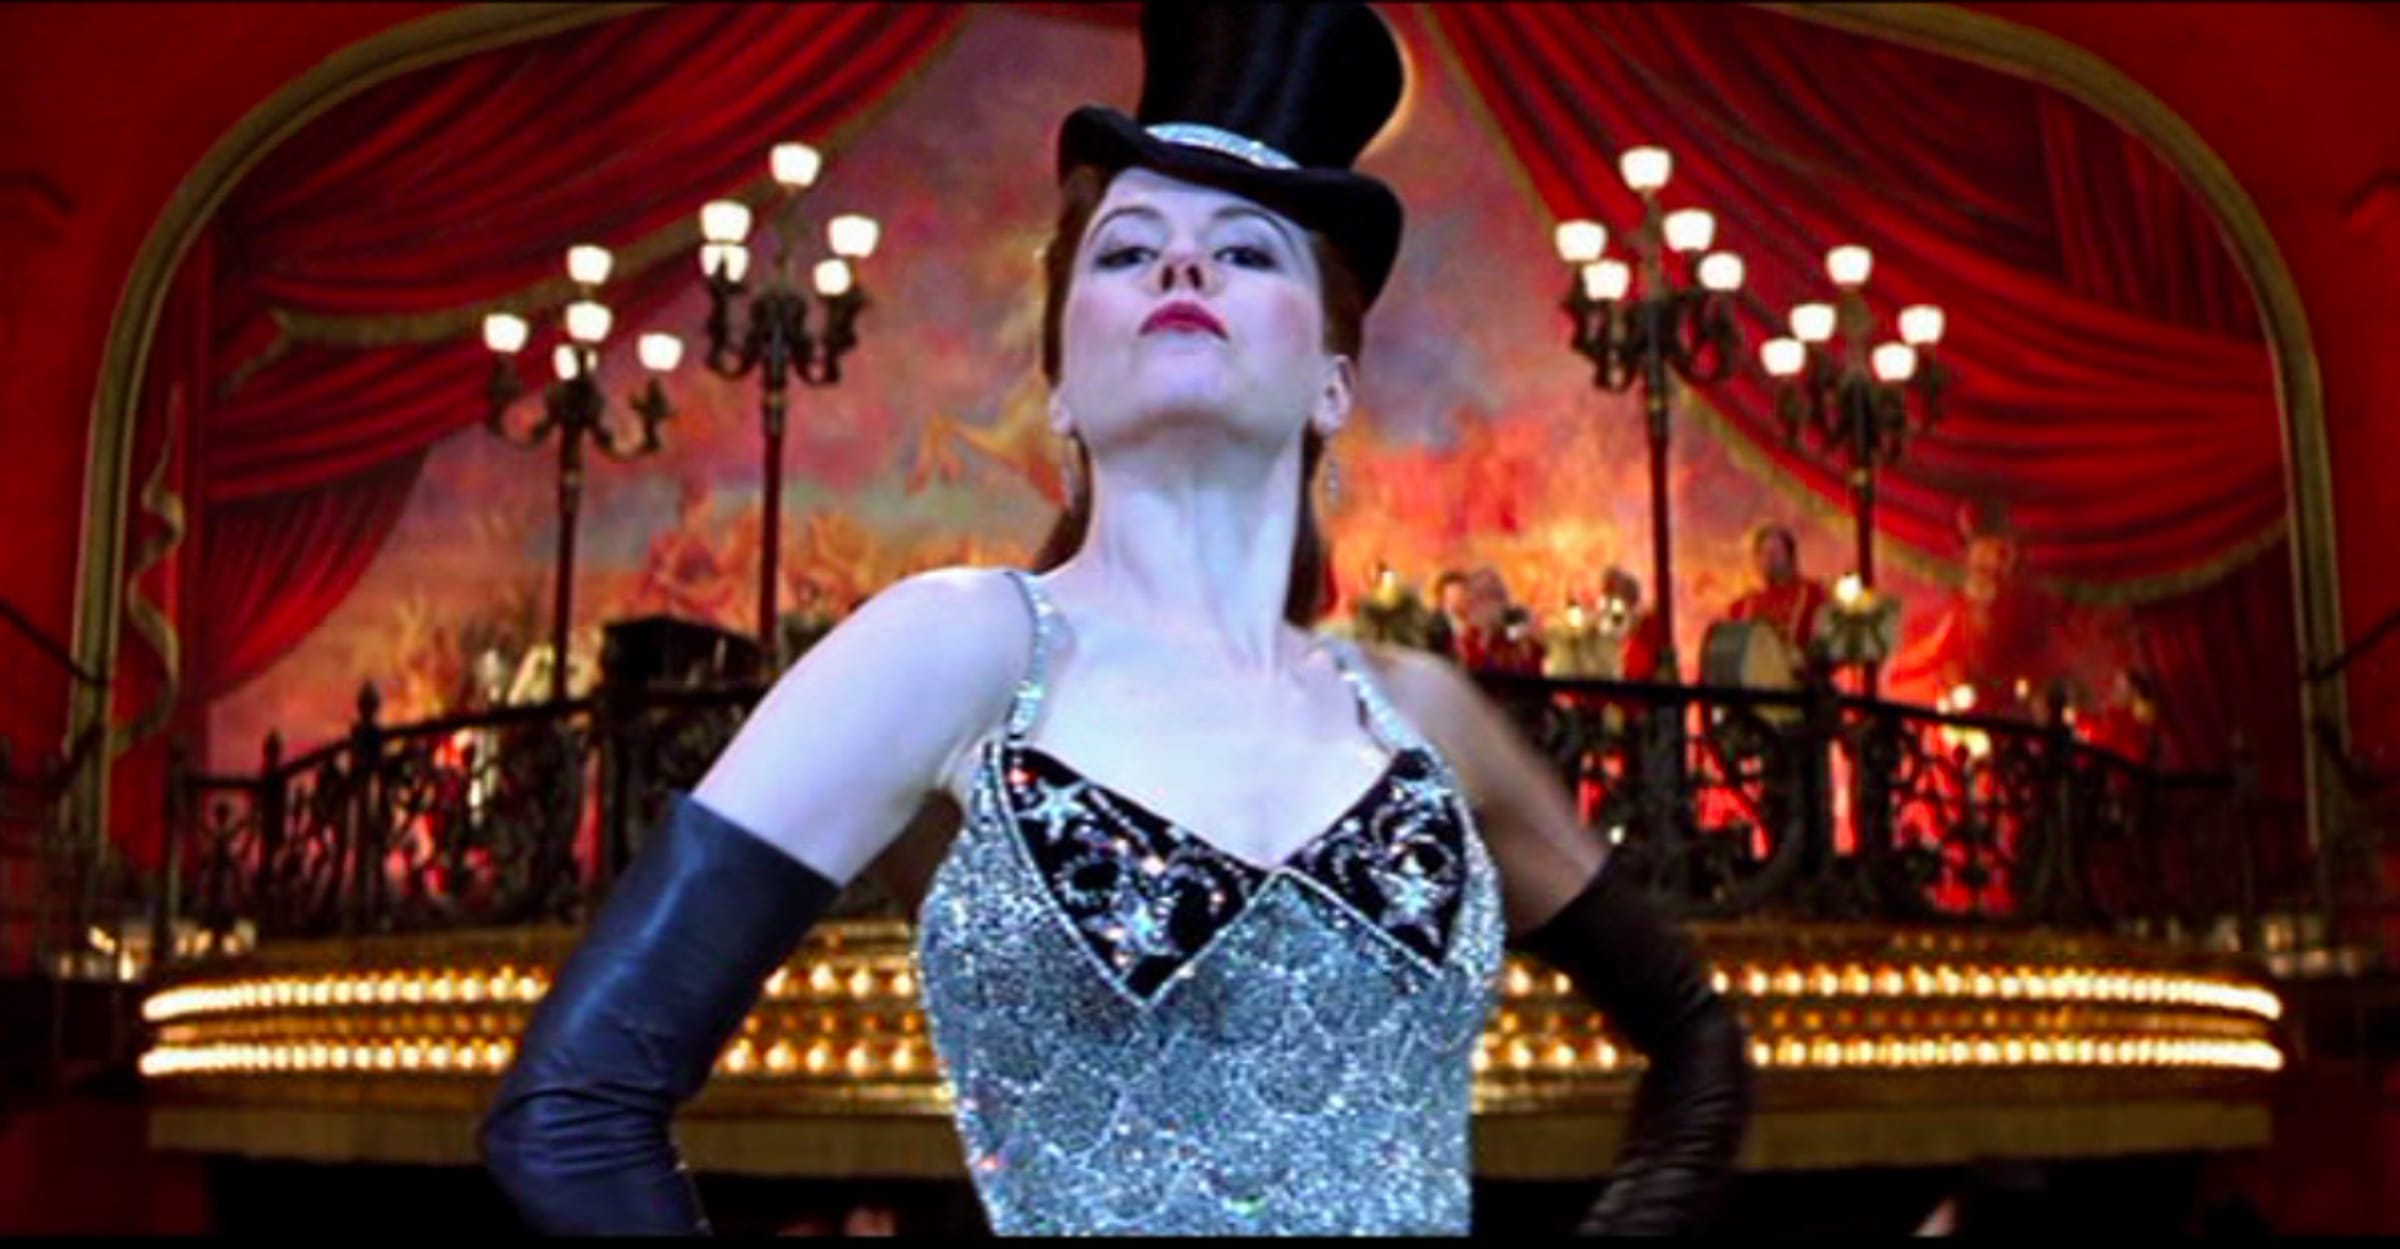 moulin rouge 2001